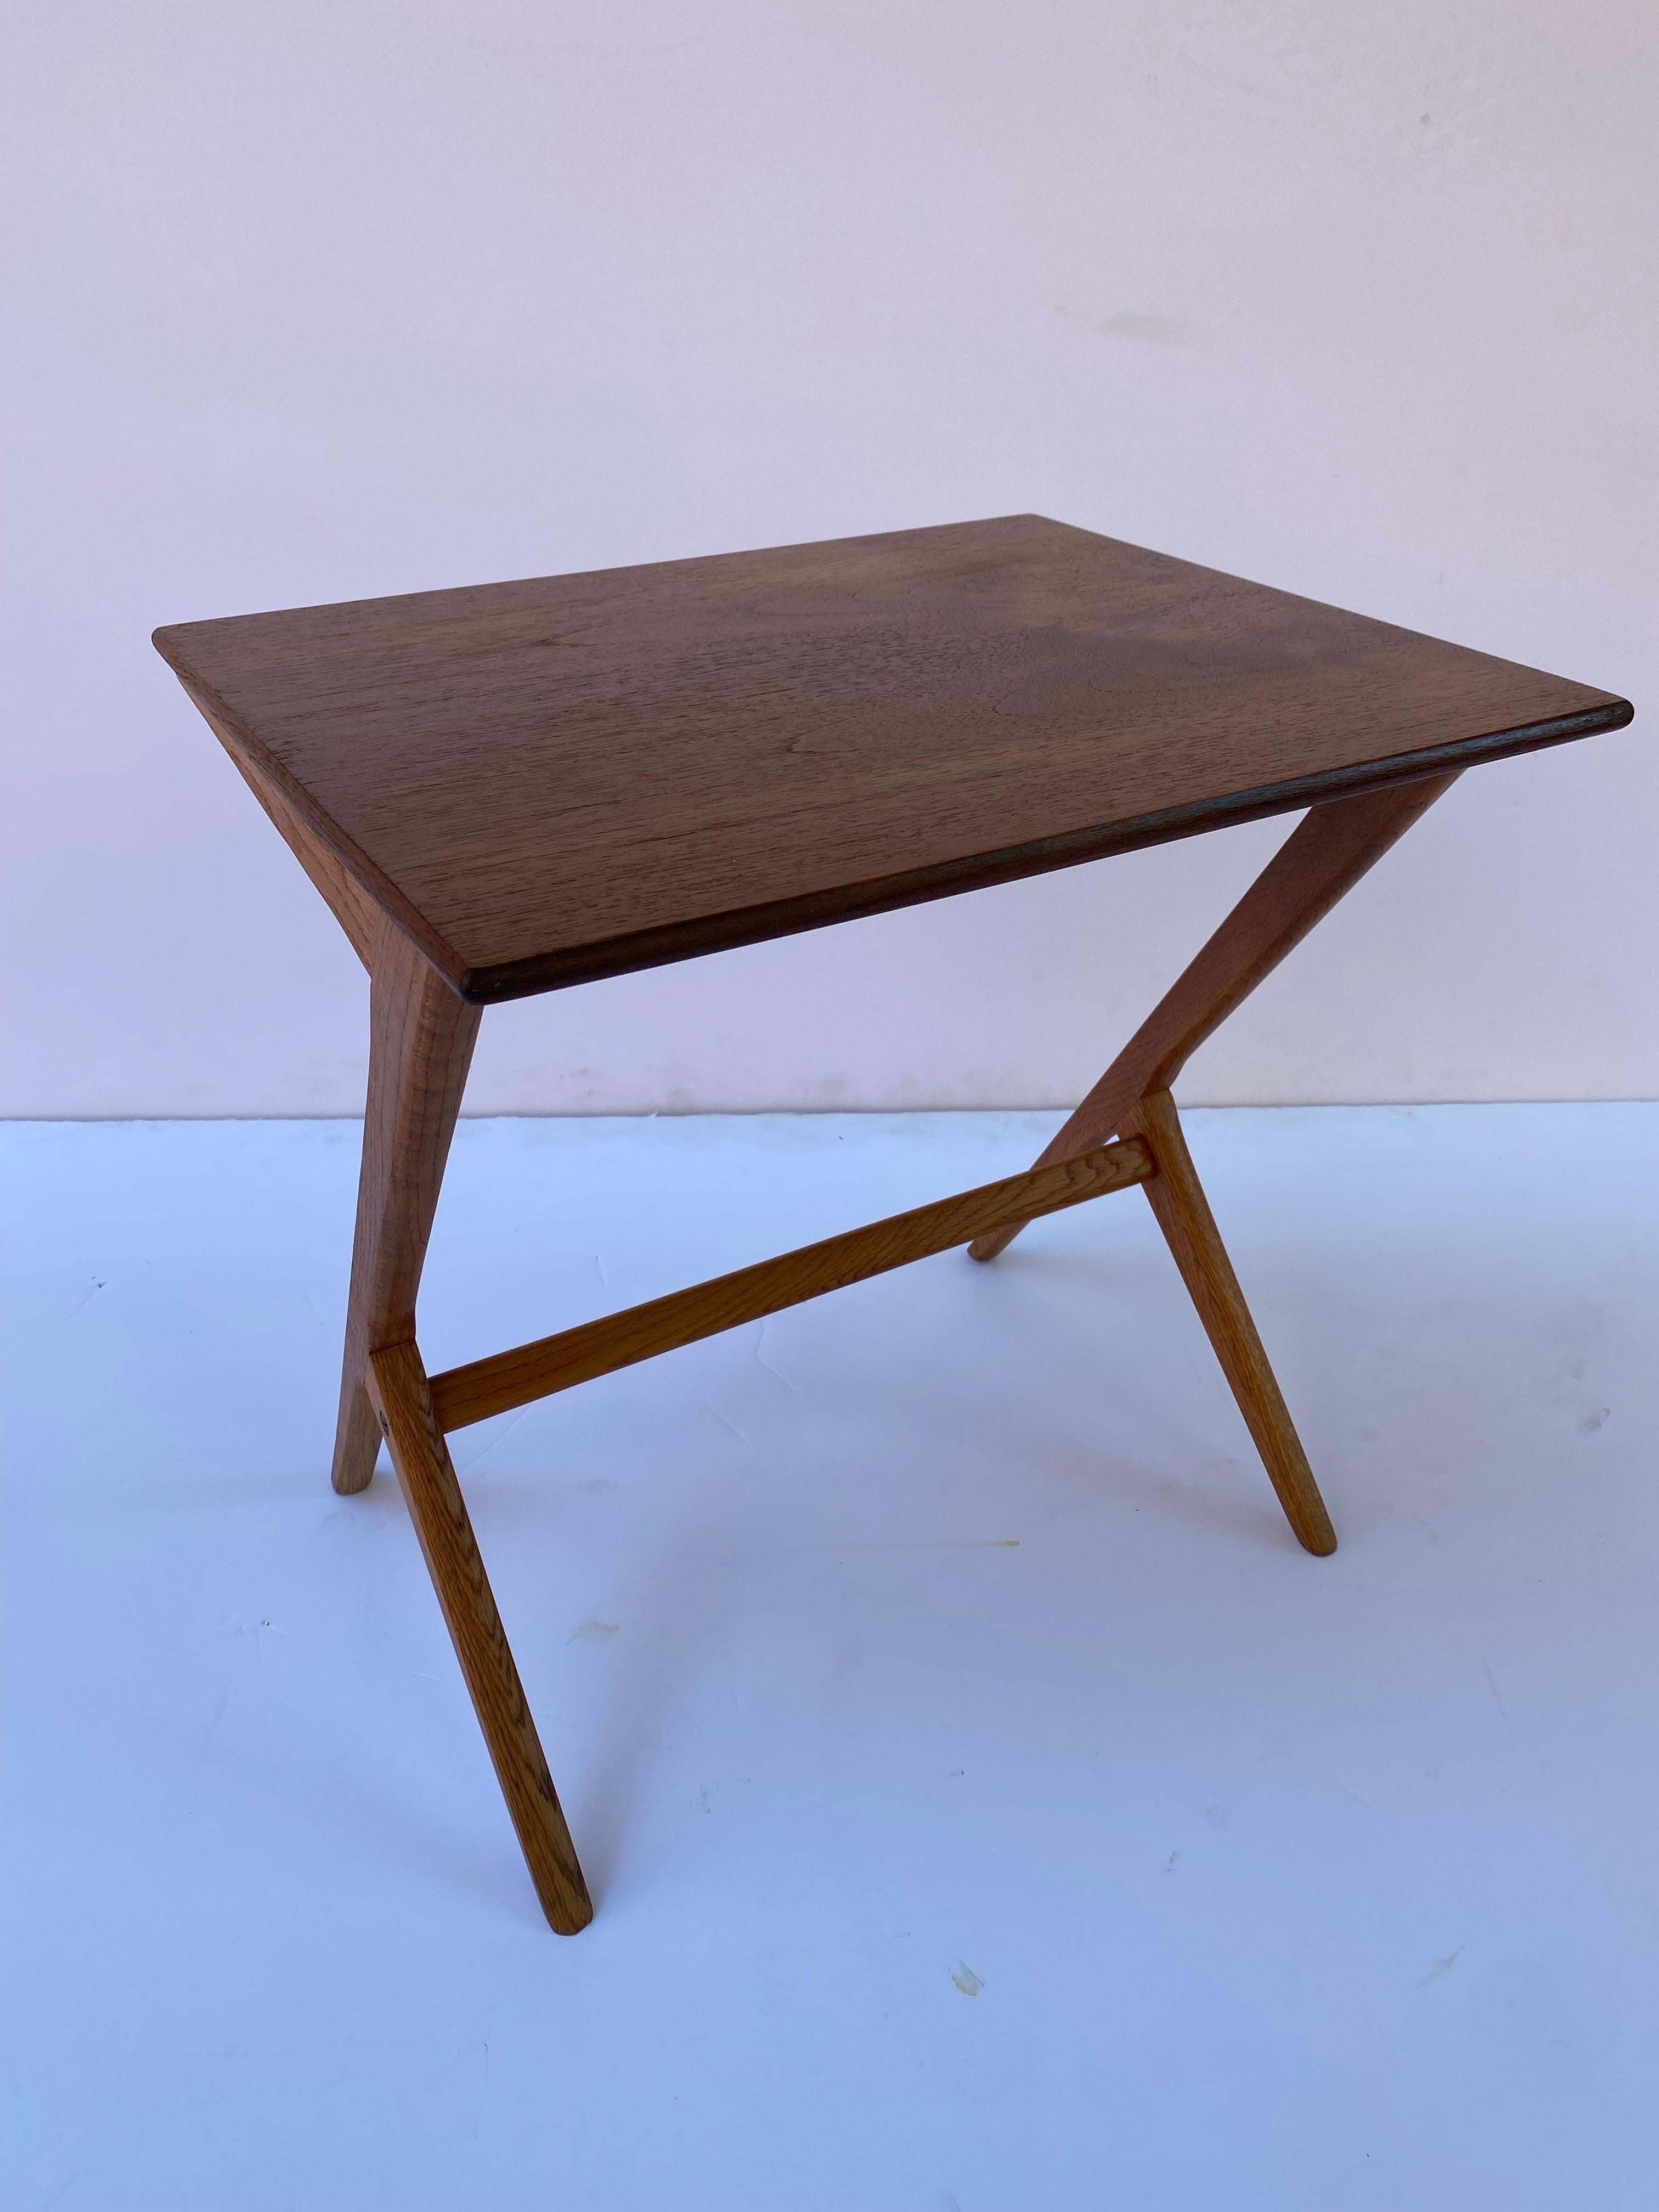 Bengt Ruda Teak and Oak Scissor Table.  Beautiful Graceful Design, usually seen as a Set of 3 Nesting Tables.  I believe this is the largest of the 3 sizes.  Perfect to use on it's own!  Refinished and ready to go!  I have delivery people traveling